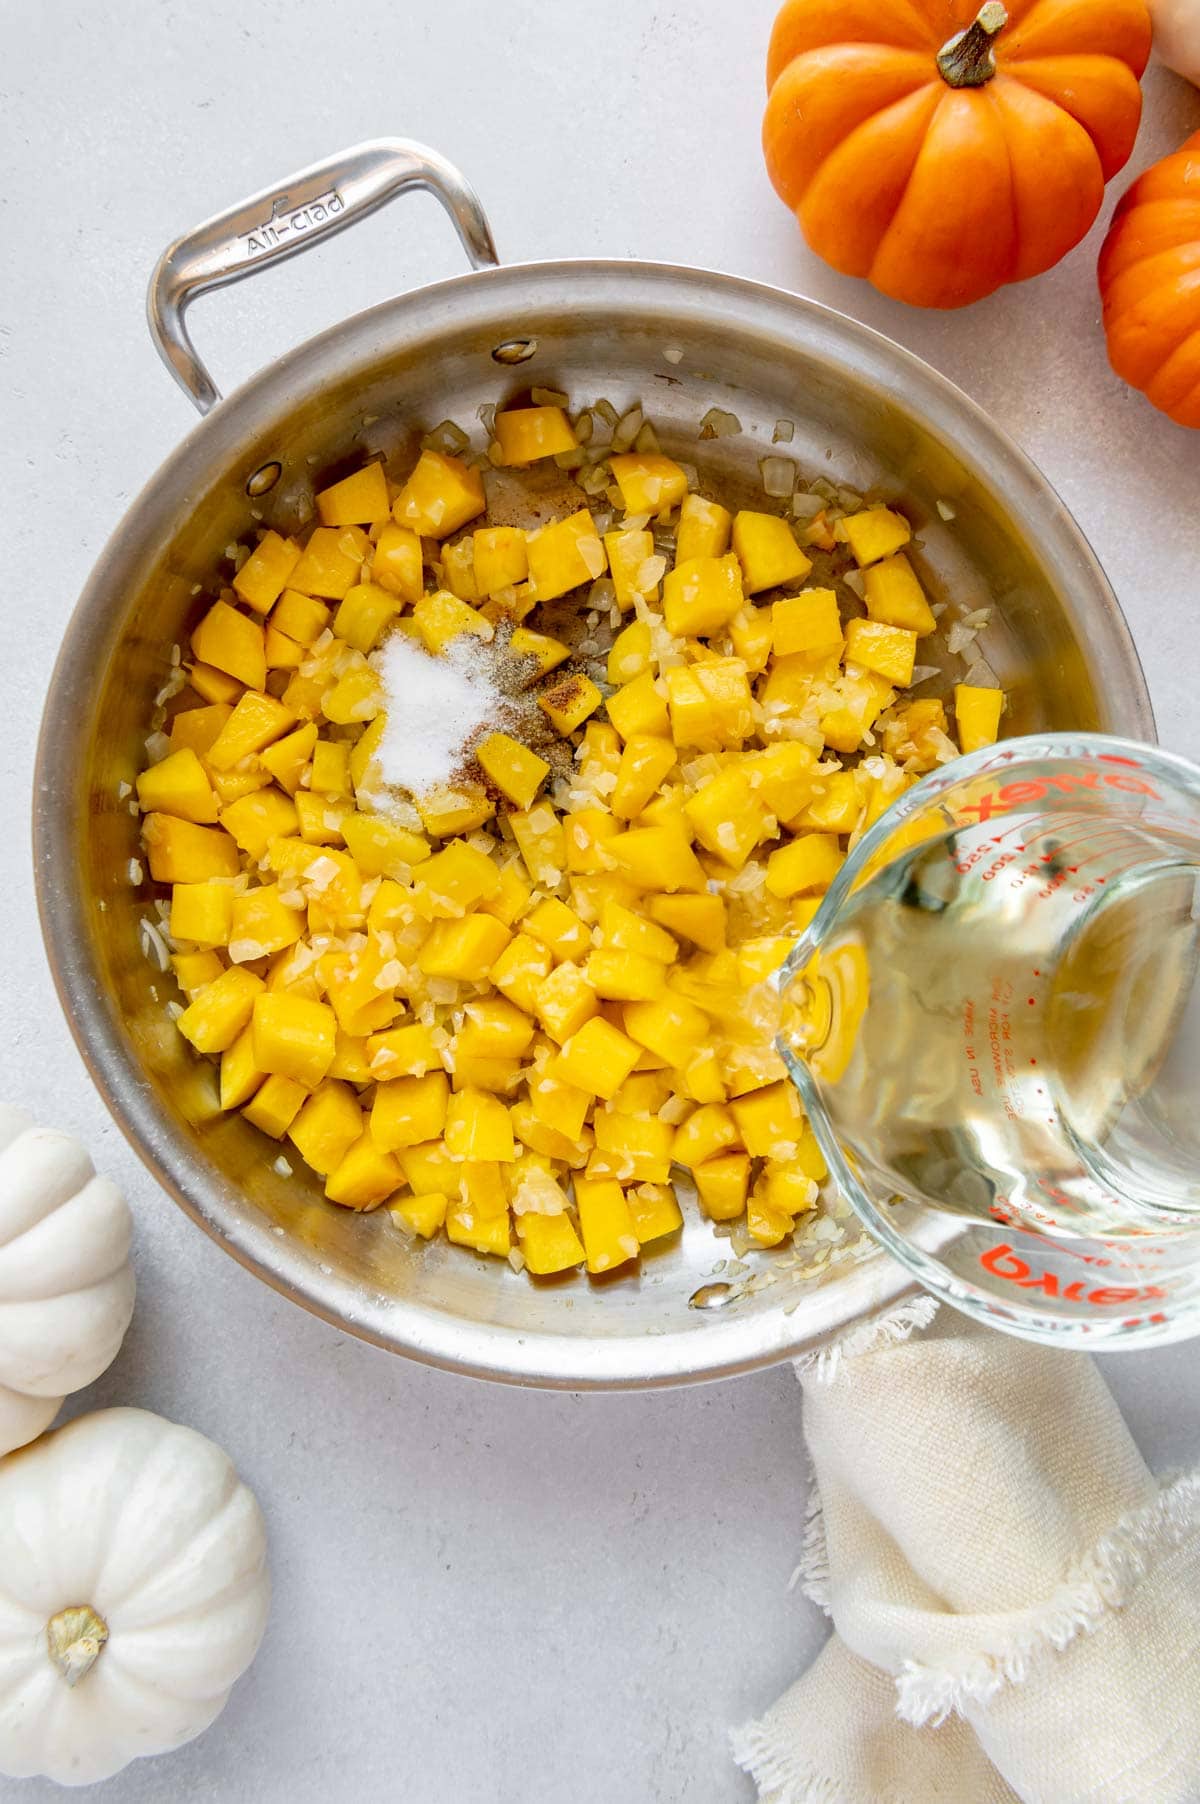 Pumpkin cubes, onions, salt, pepper, and nutmeg in a saucepan with white wine being poured over it.